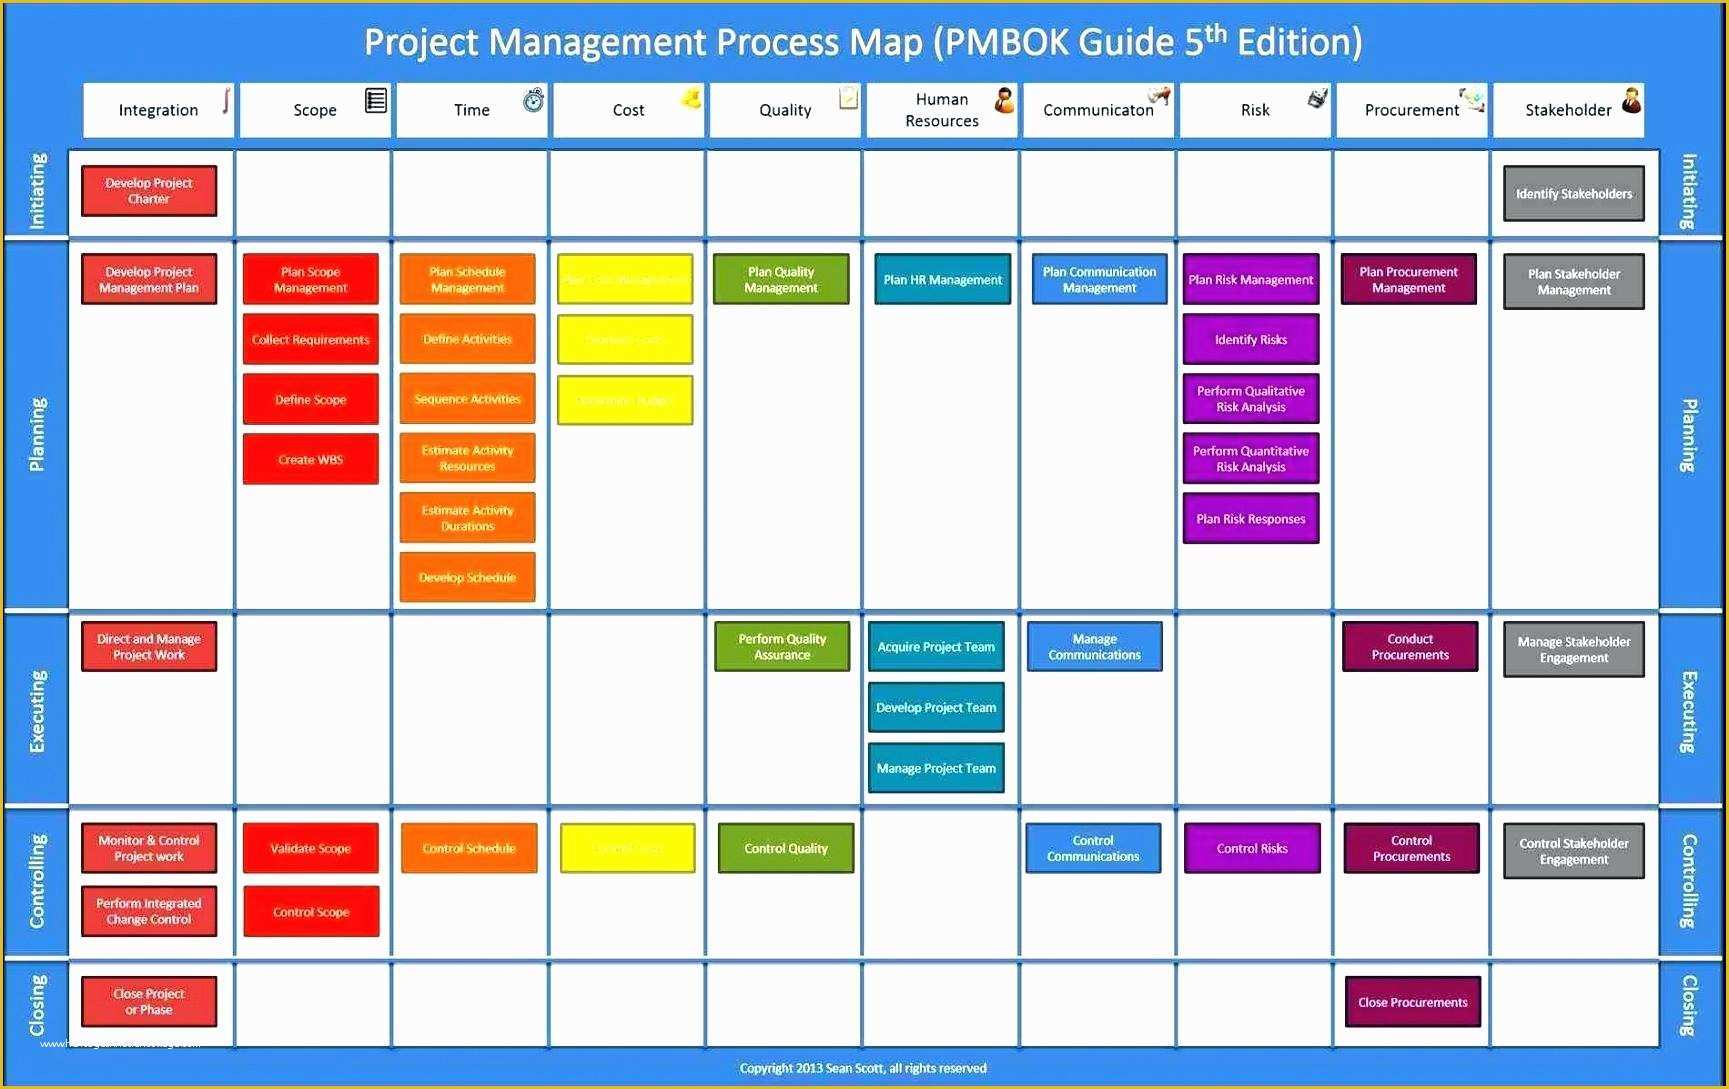 Process Mapping Template Powerpoint